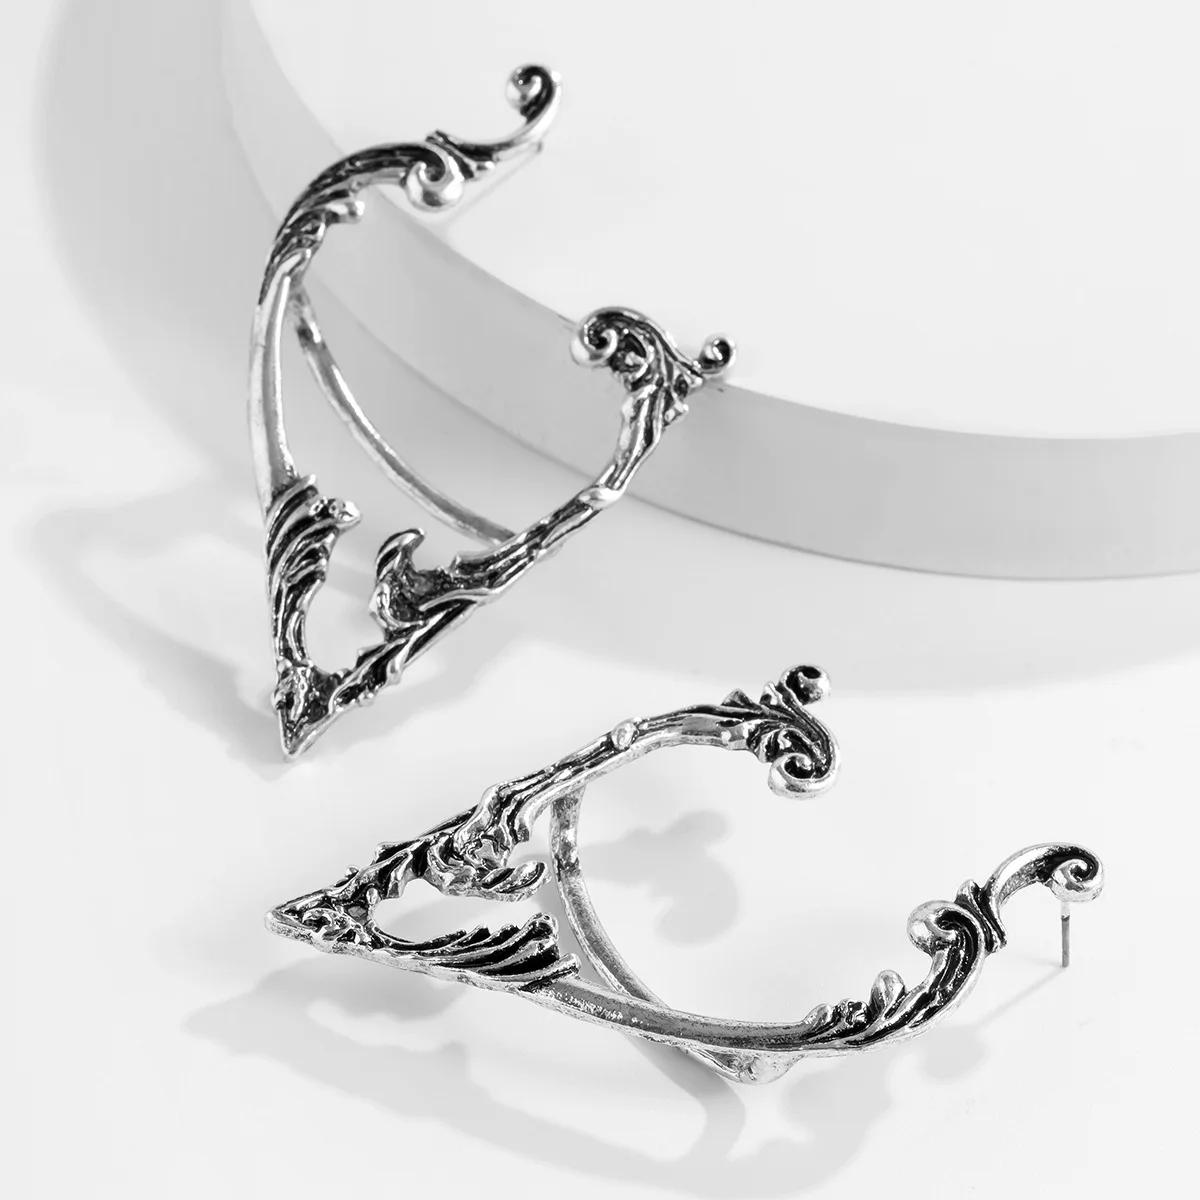 Gothic Elves Ear Cuff Piercing Cartilage Climber Ear Wrap Retro Silver Stud Earring Punk Hip Hop Clip on Statement Earrings Gift